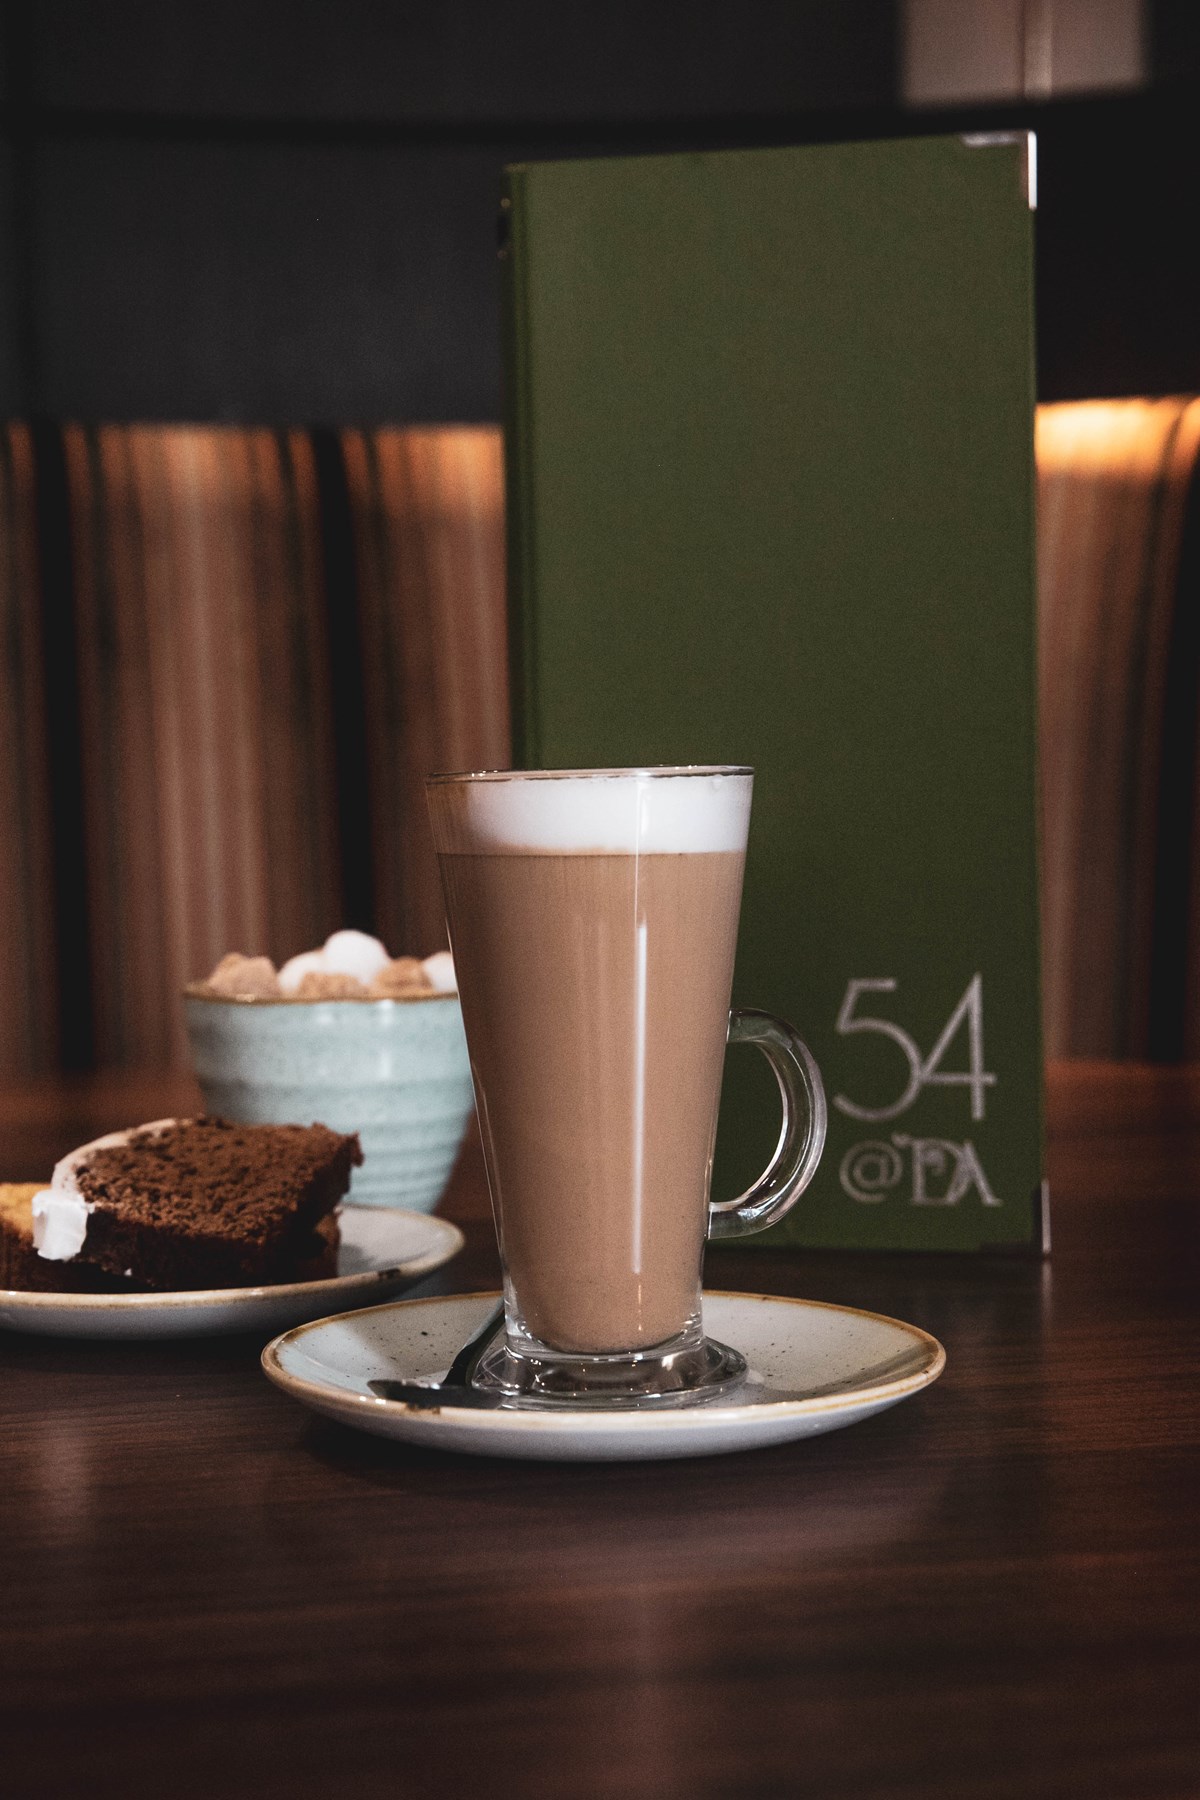 A hot chocolate, which can be bought at the 54@ Dumfries Arms restaurant.